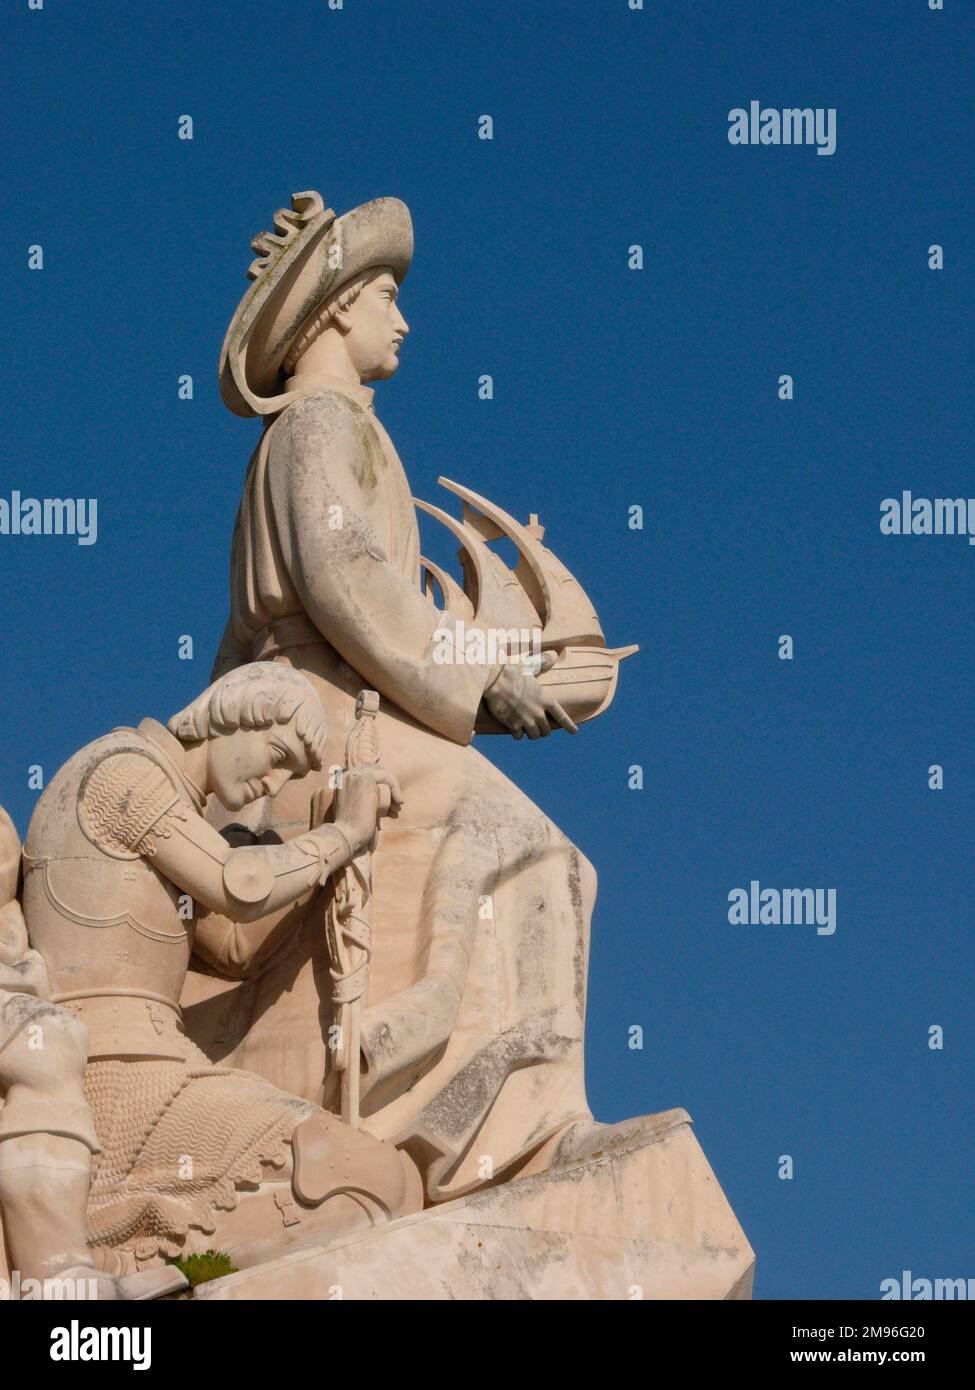 Portugal, Lisbon, Belem: Monument to the Discoveries (Padrão dos Descobrimentos) (detail). Henry the Navigator (right) and The Saint Prince Ferdinand are depicted here. Stock Photo